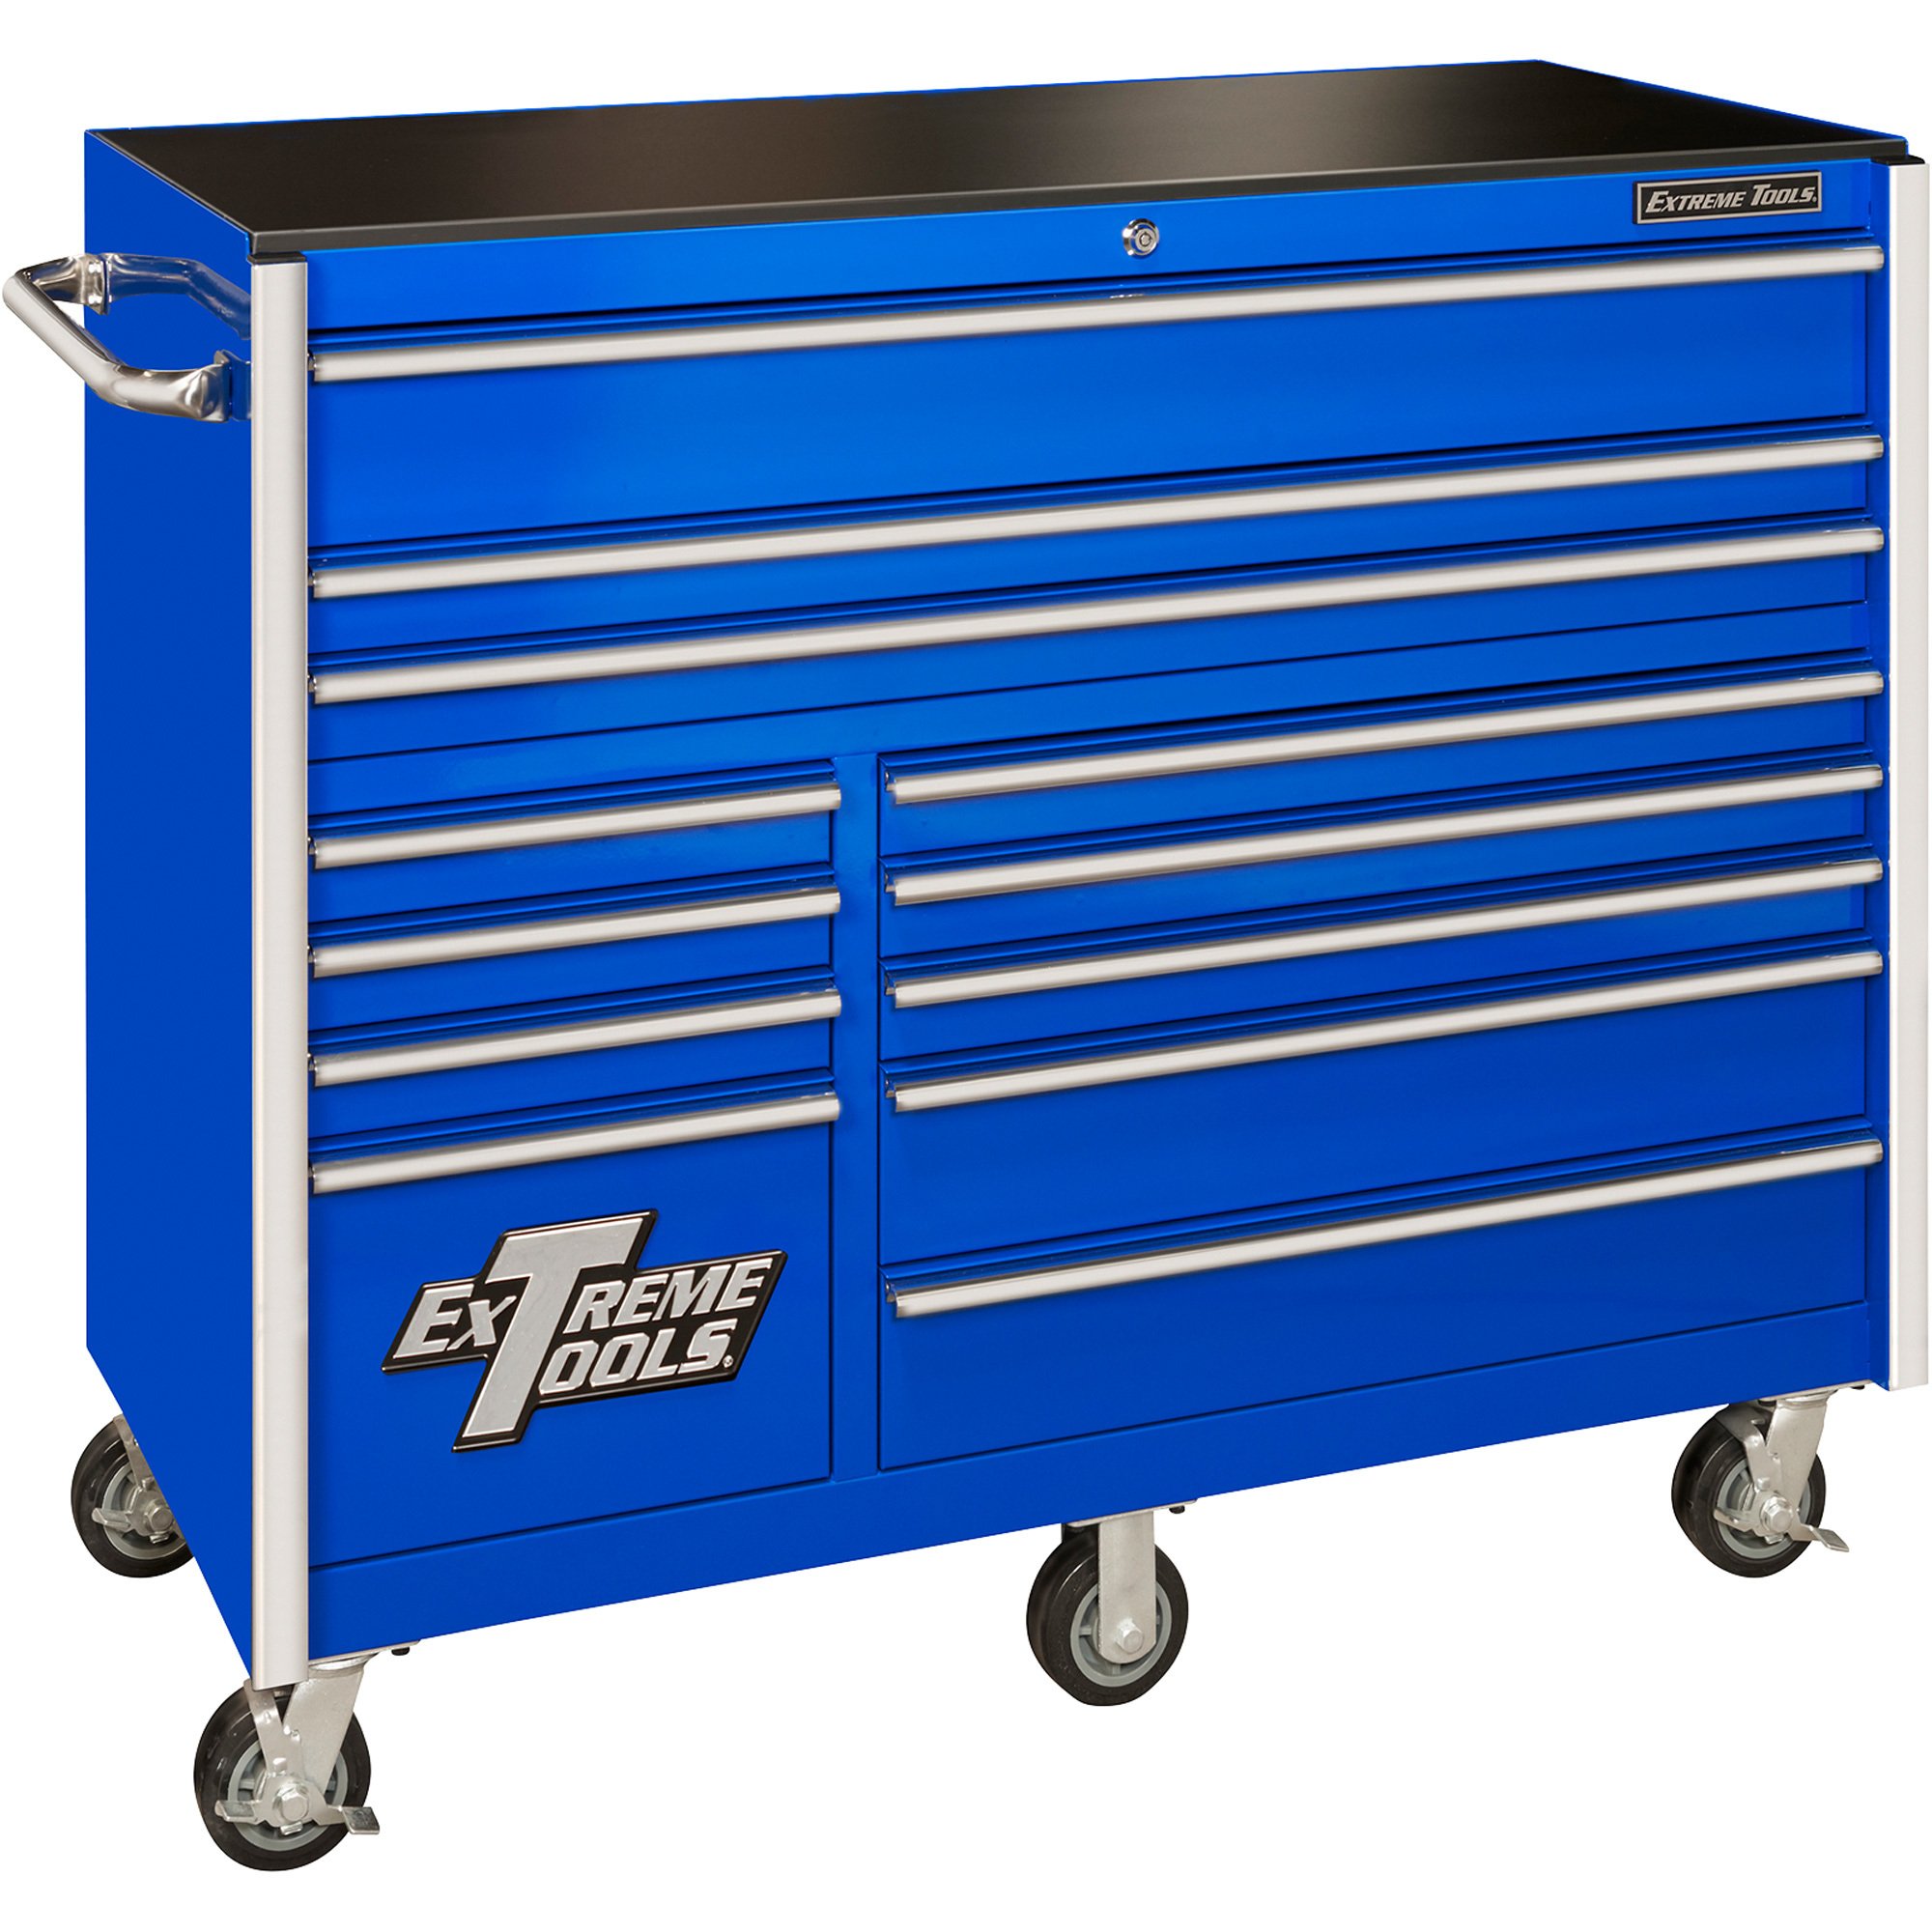 Extreme Tools RX Series Professional 55in. 12 Drawer Roller Tool Cabinet —  Blue, 55in.W x 25in.D x 46in.H, Model# RX552512RCBL